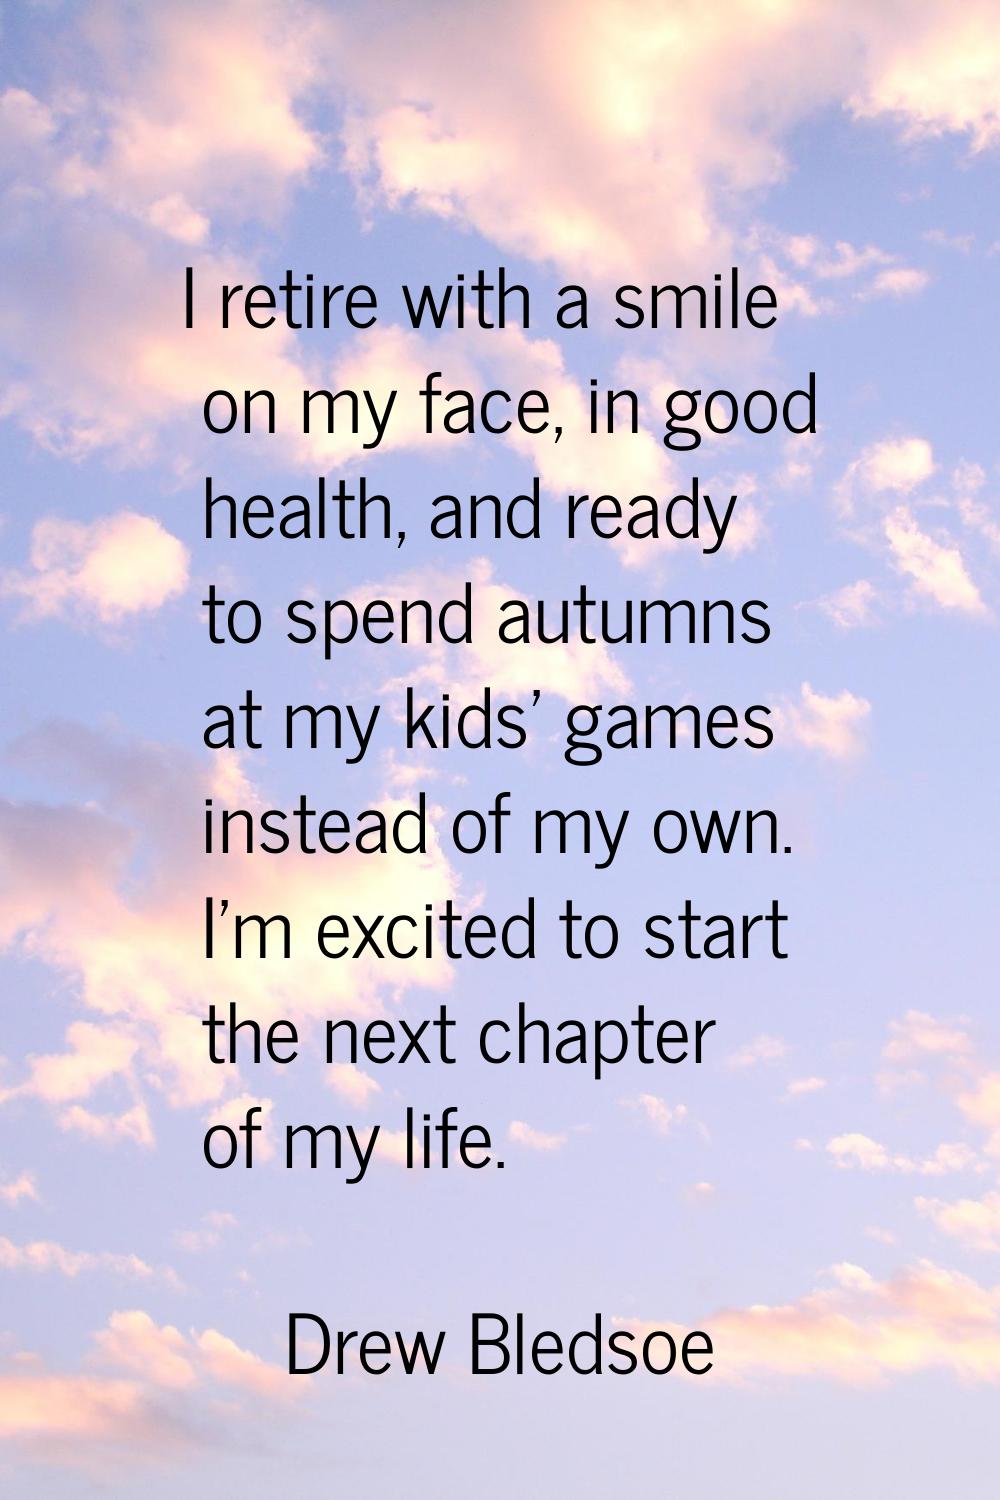 I retire with a smile on my face, in good health, and ready to spend autumns at my kids' games inst